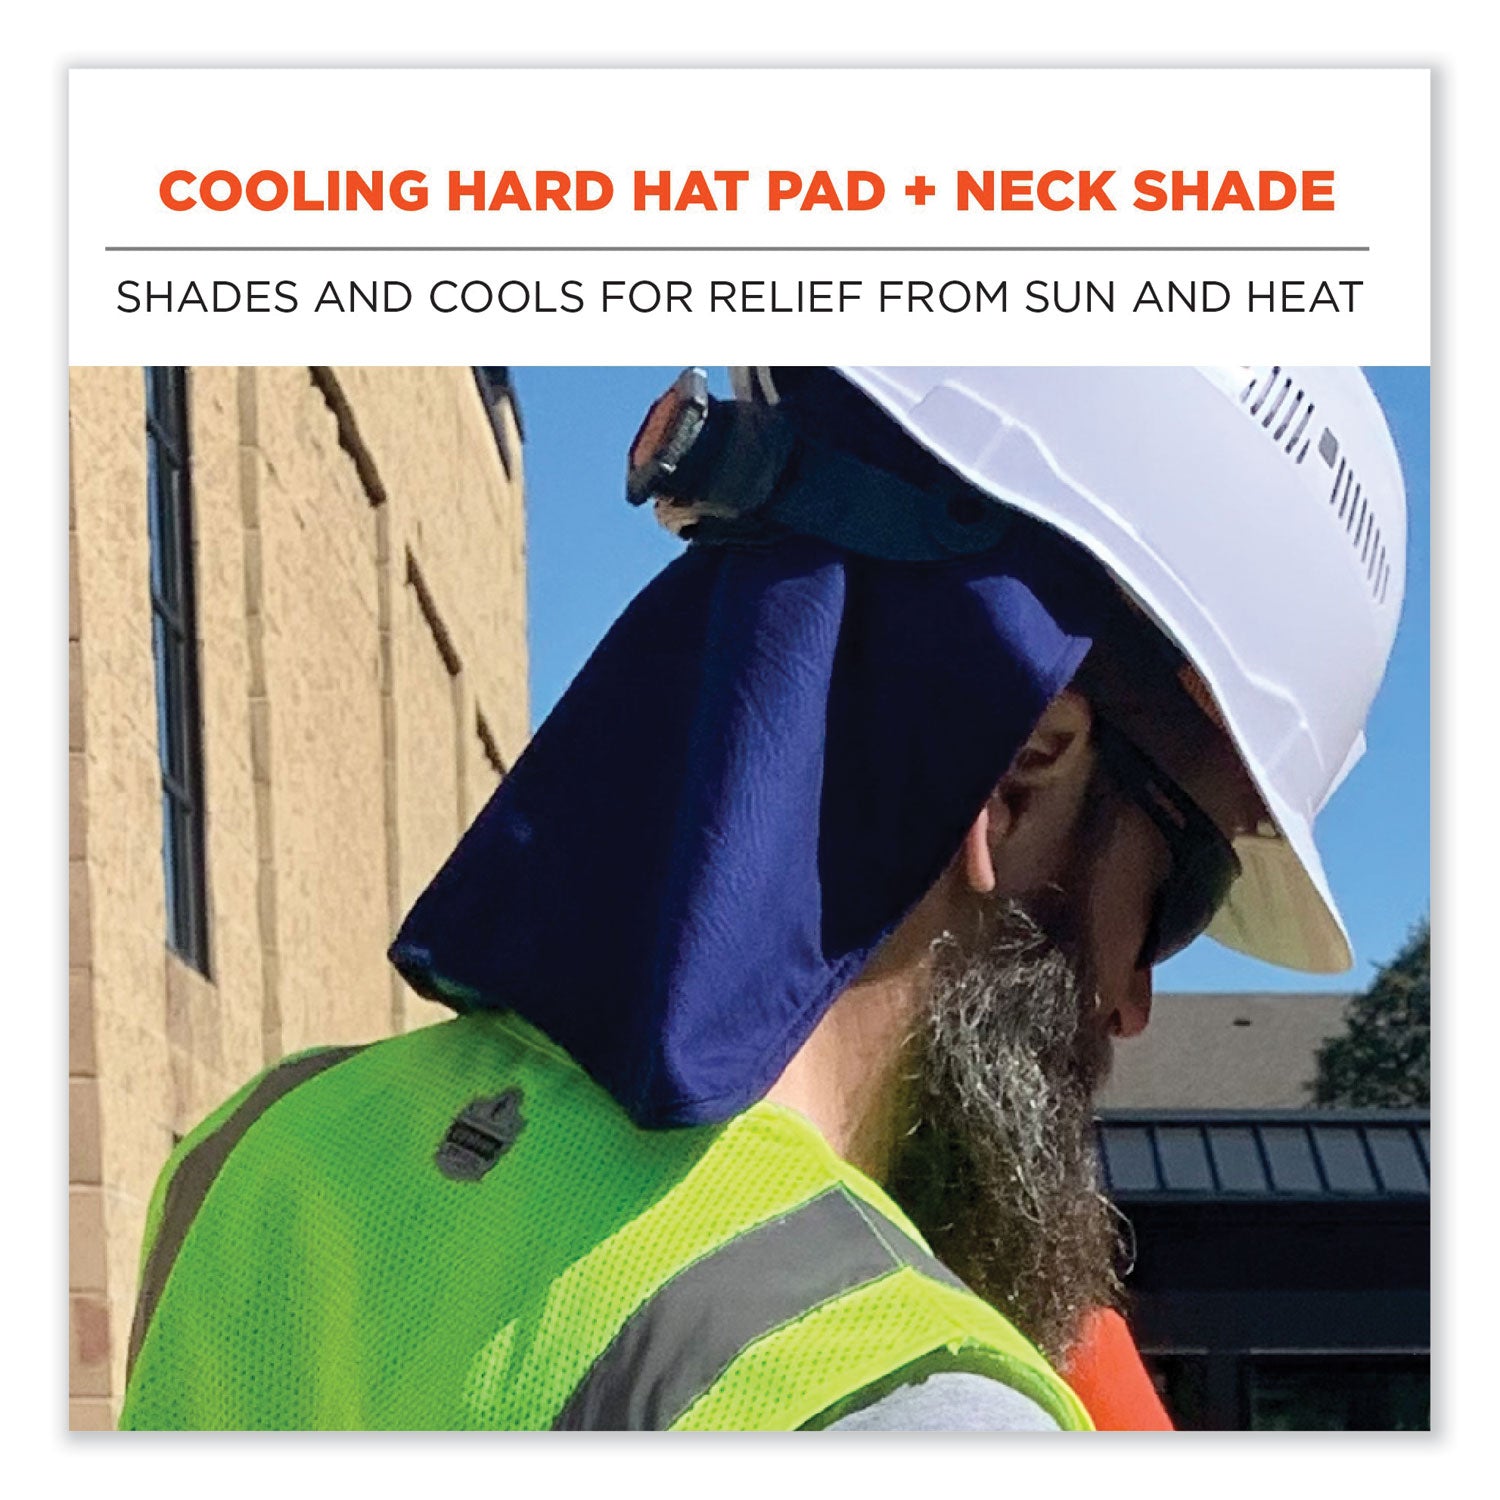 chill-its-6717-cooling-hard-hat-pad-and-neck-shade--polymers-125-x-975-blue-ships-in-1-3-business-days_ego12336 - 2